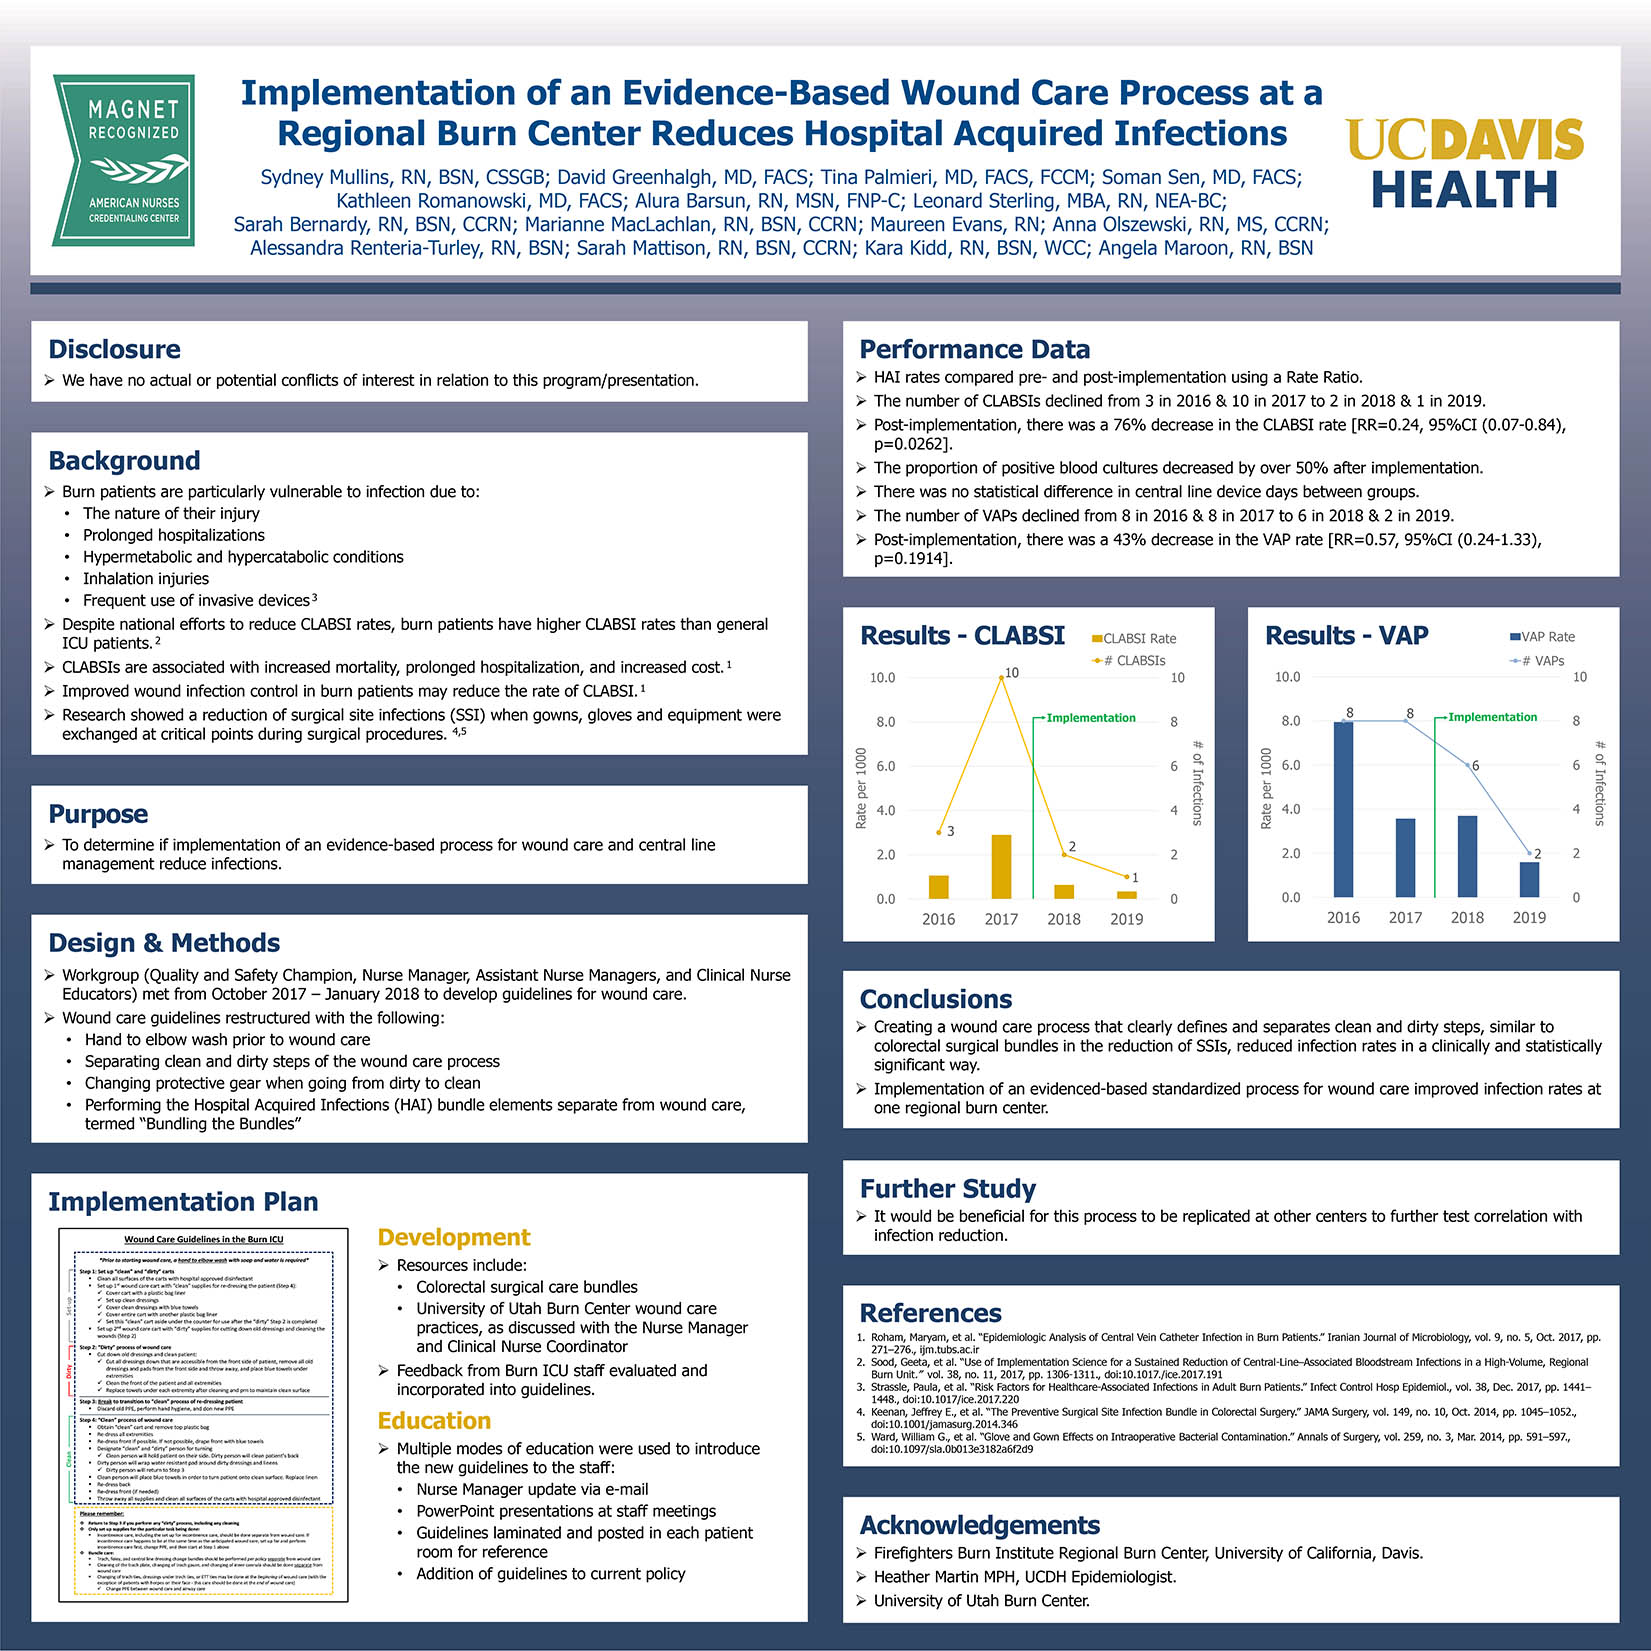 Implementation of an Evidence-Based Wound Care Process at a Regional ...